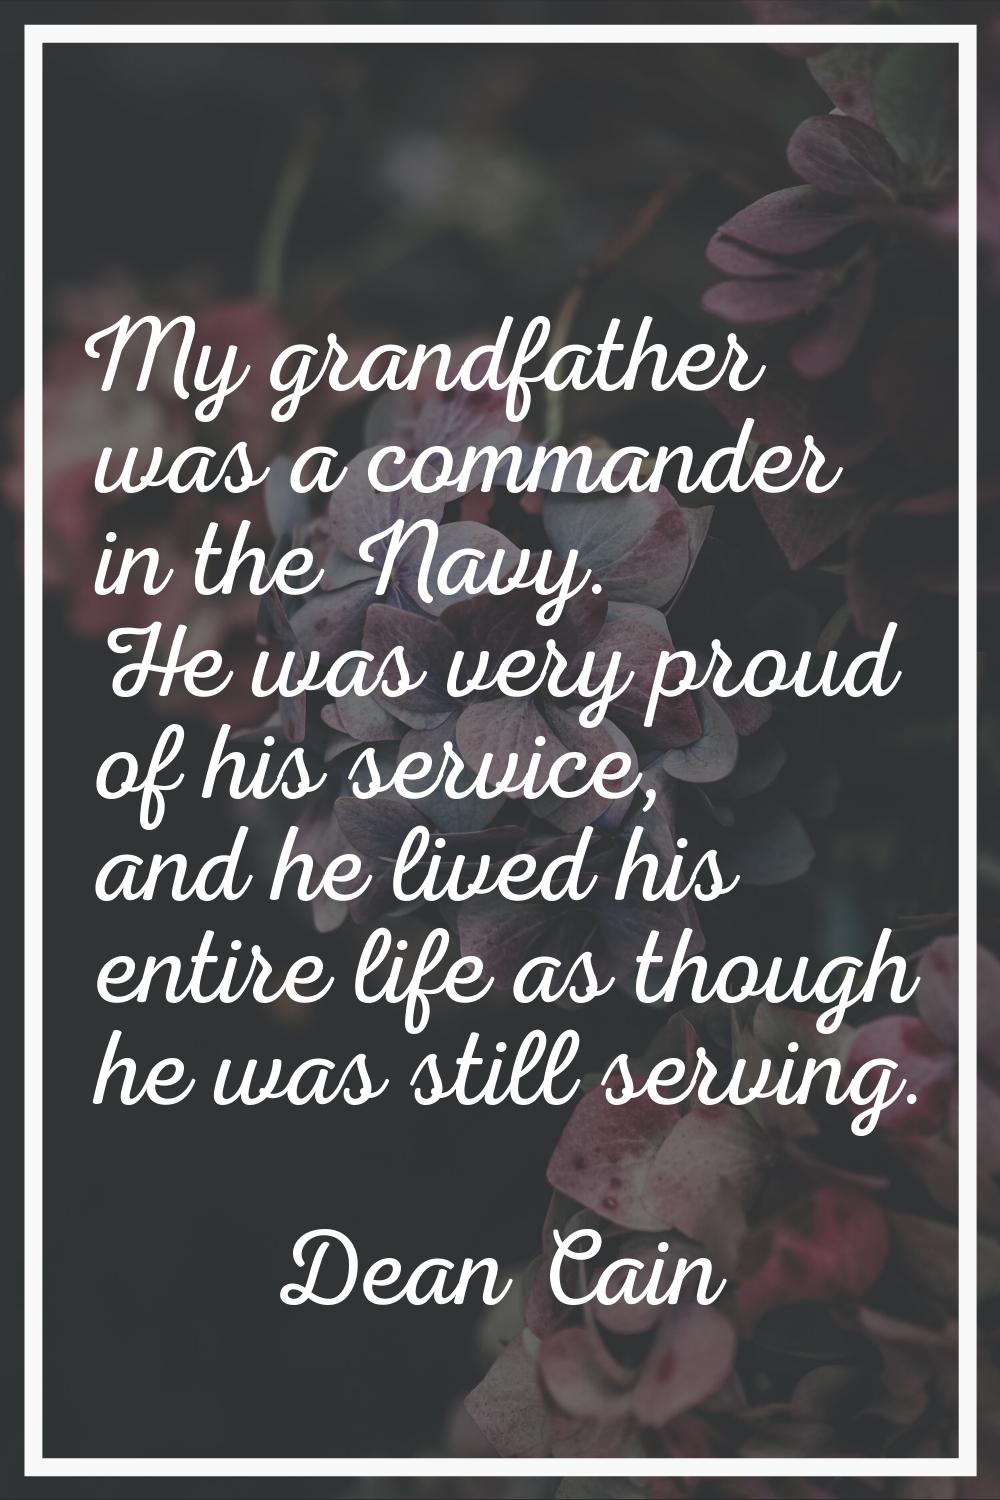 My grandfather was a commander in the Navy. He was very proud of his service, and he lived his enti